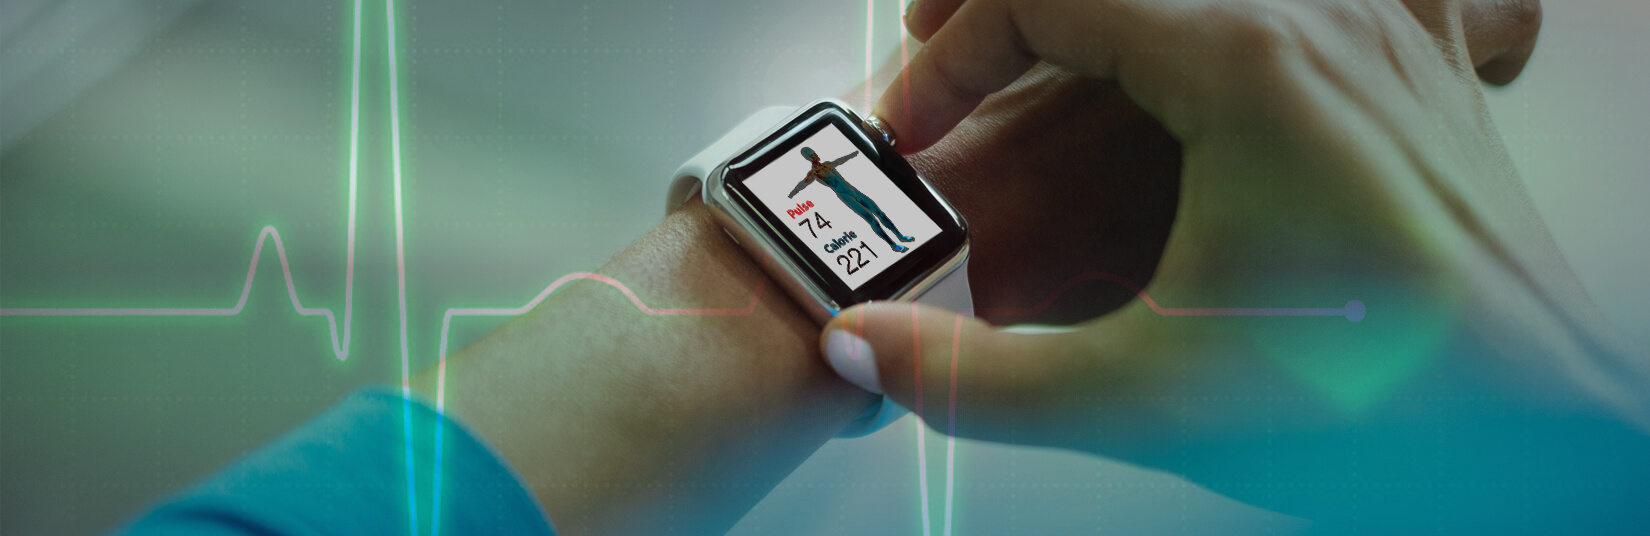 future of Wearable technology